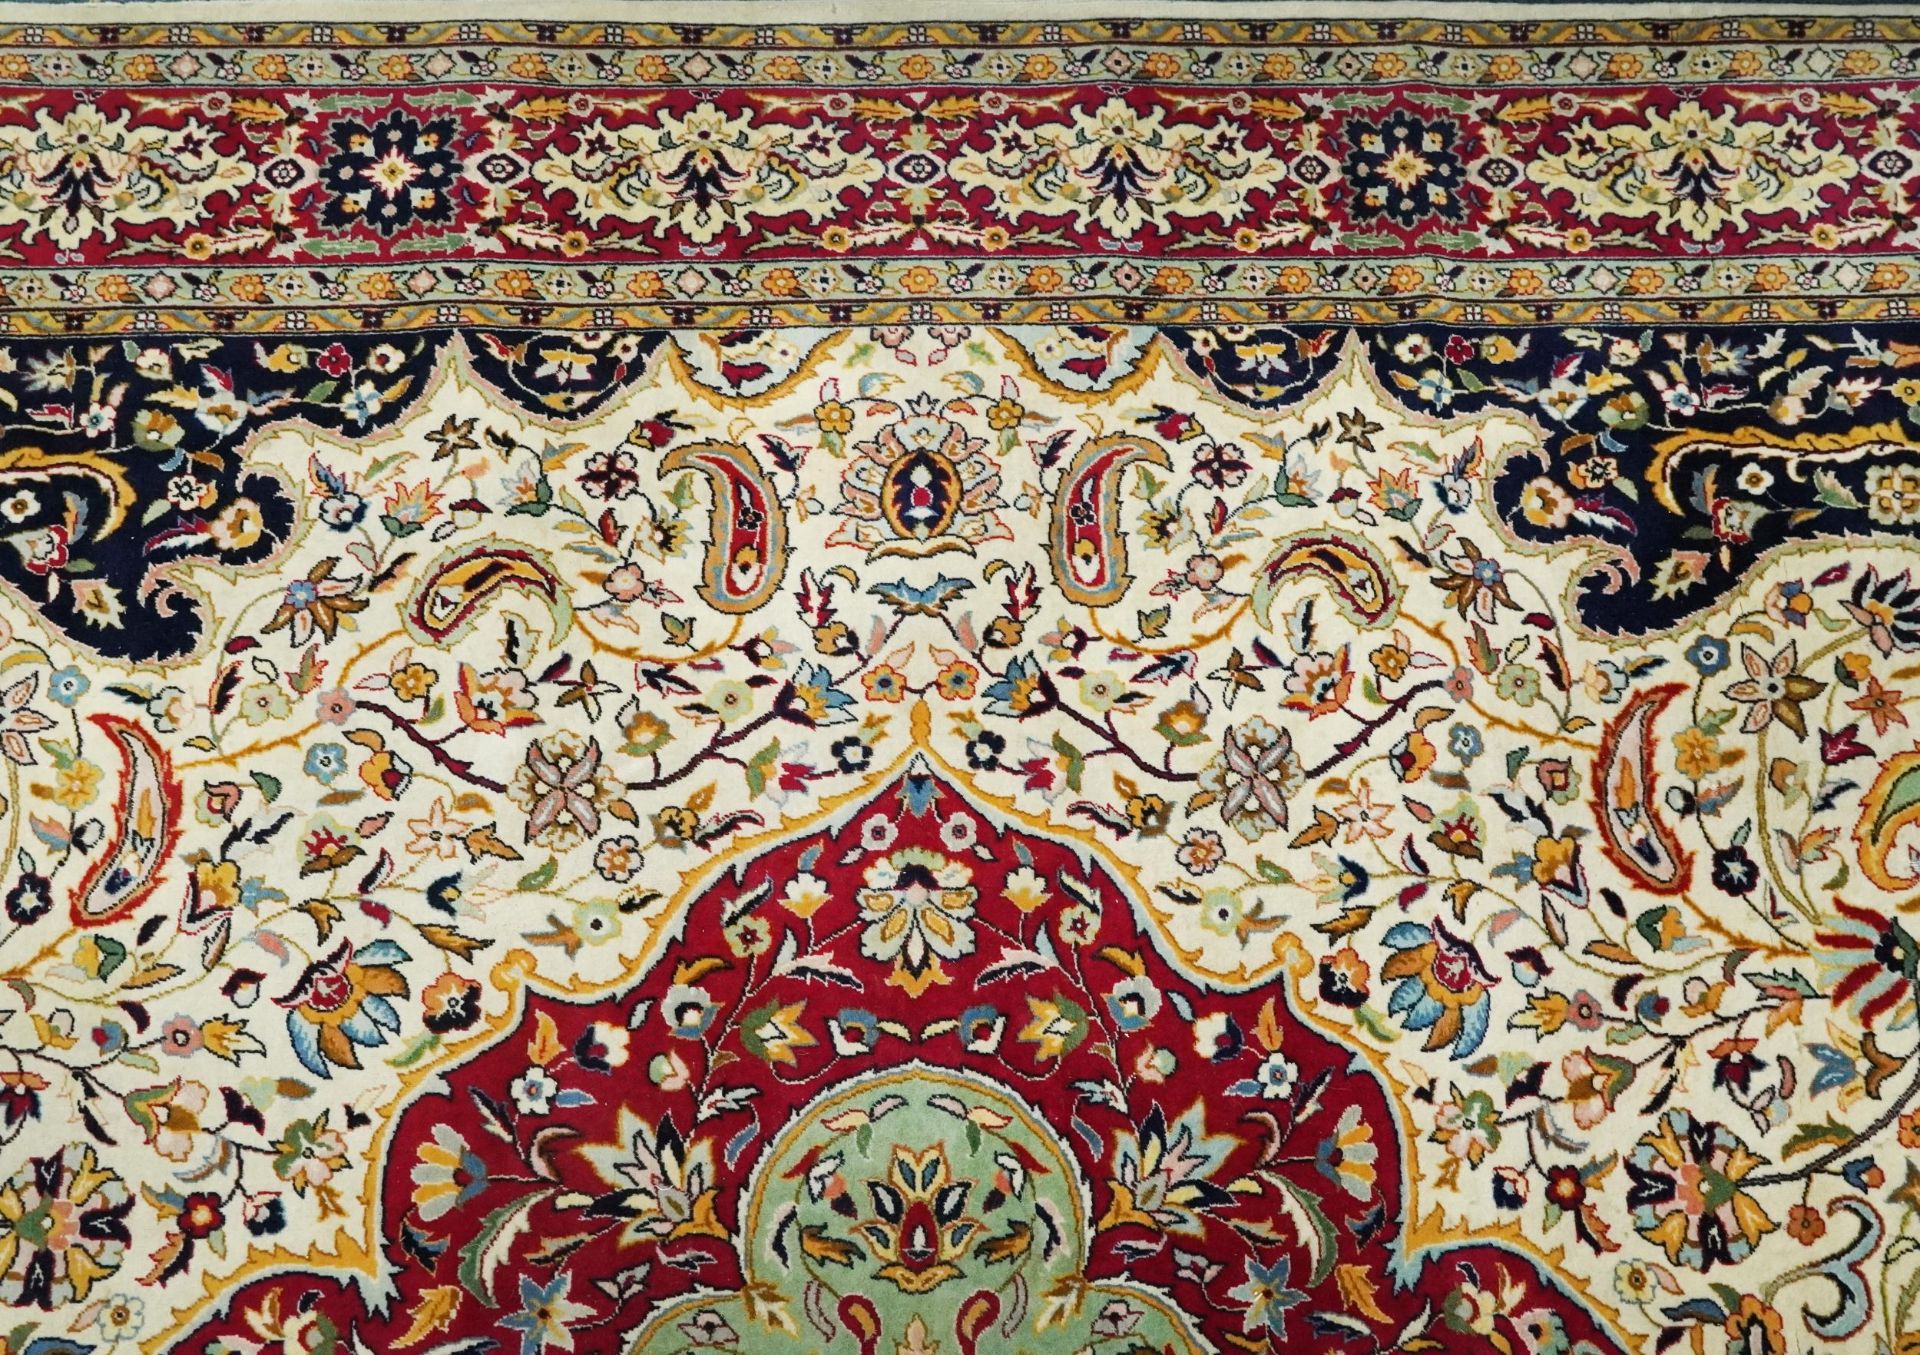 Rectangular Persian cream and red ground rug having an all over repeat floral design, 370cm x 270cm - Image 3 of 12